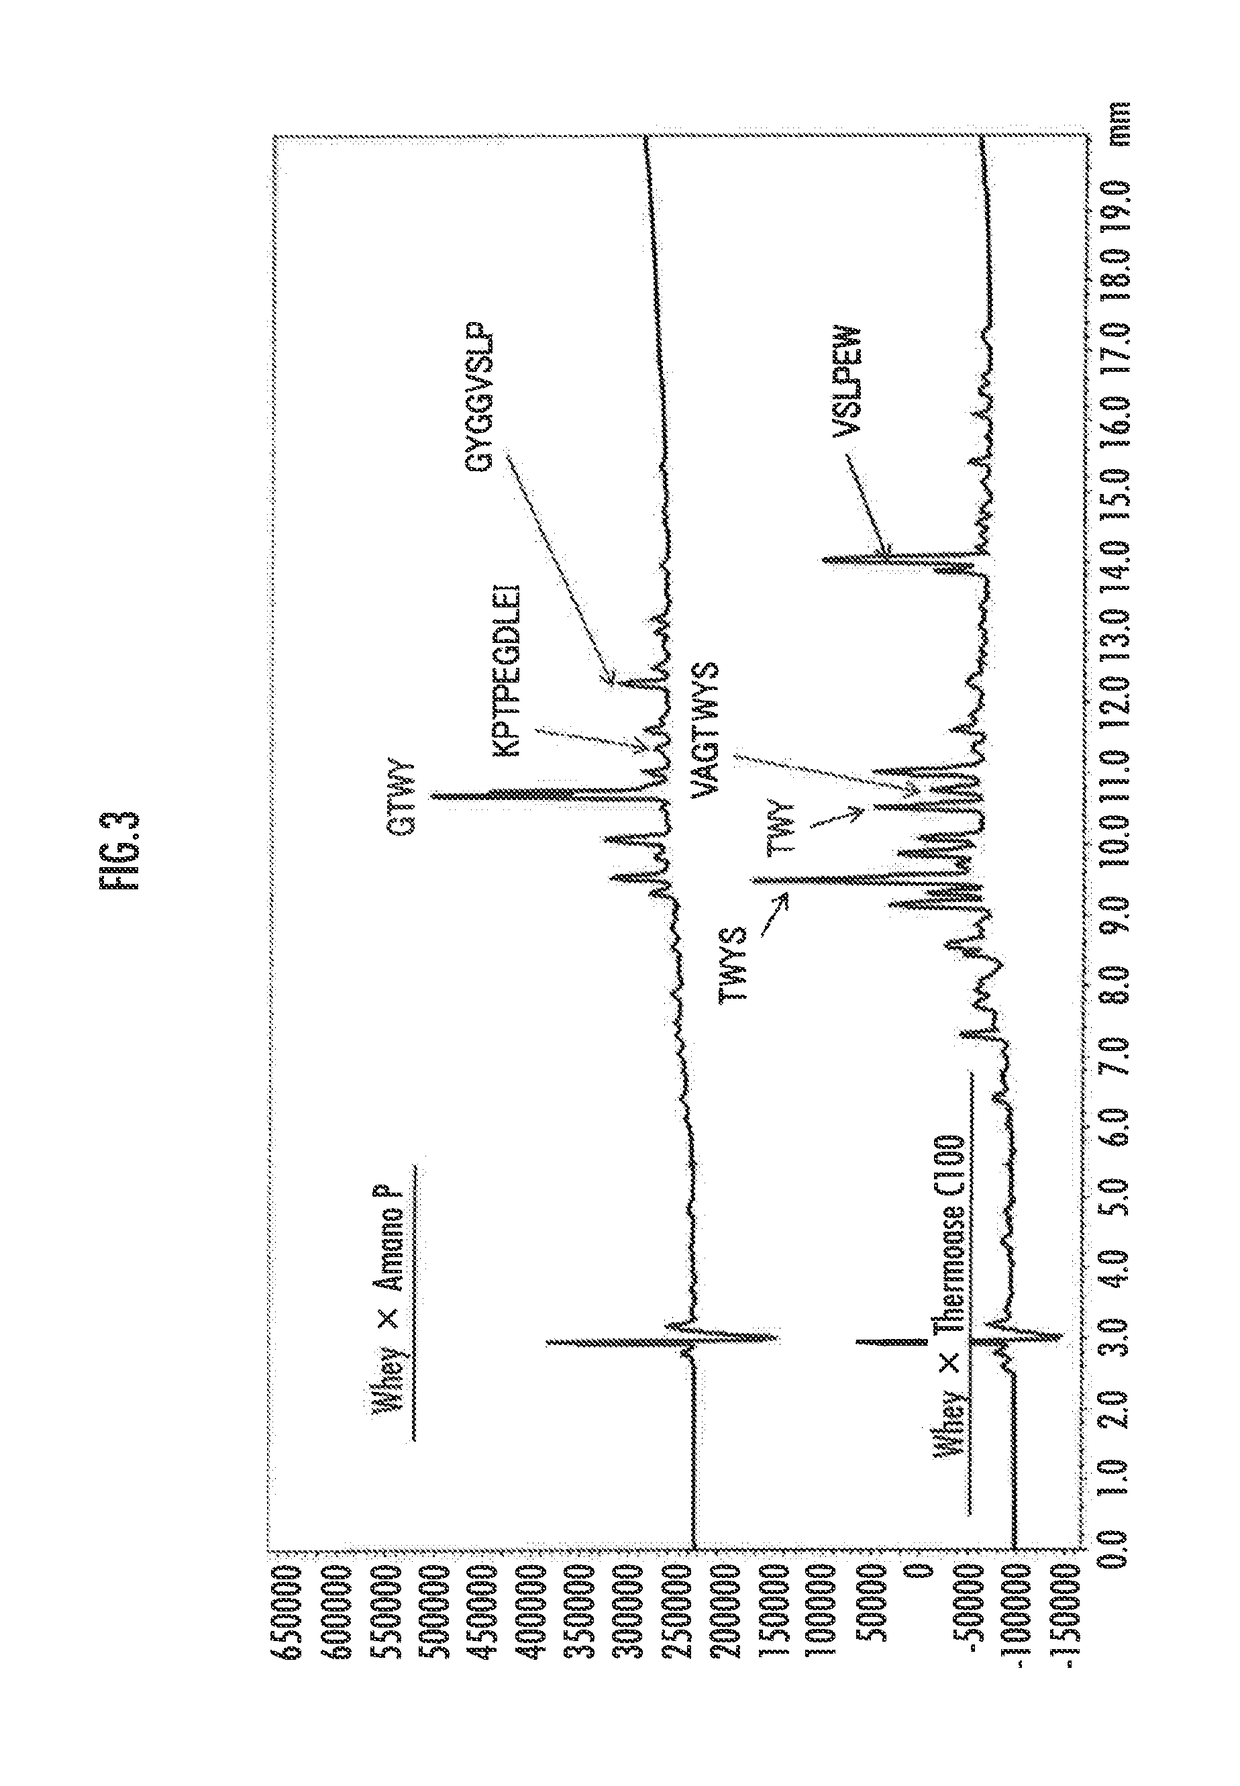 Composition for enhancing memory and learning function and/or cognitive function